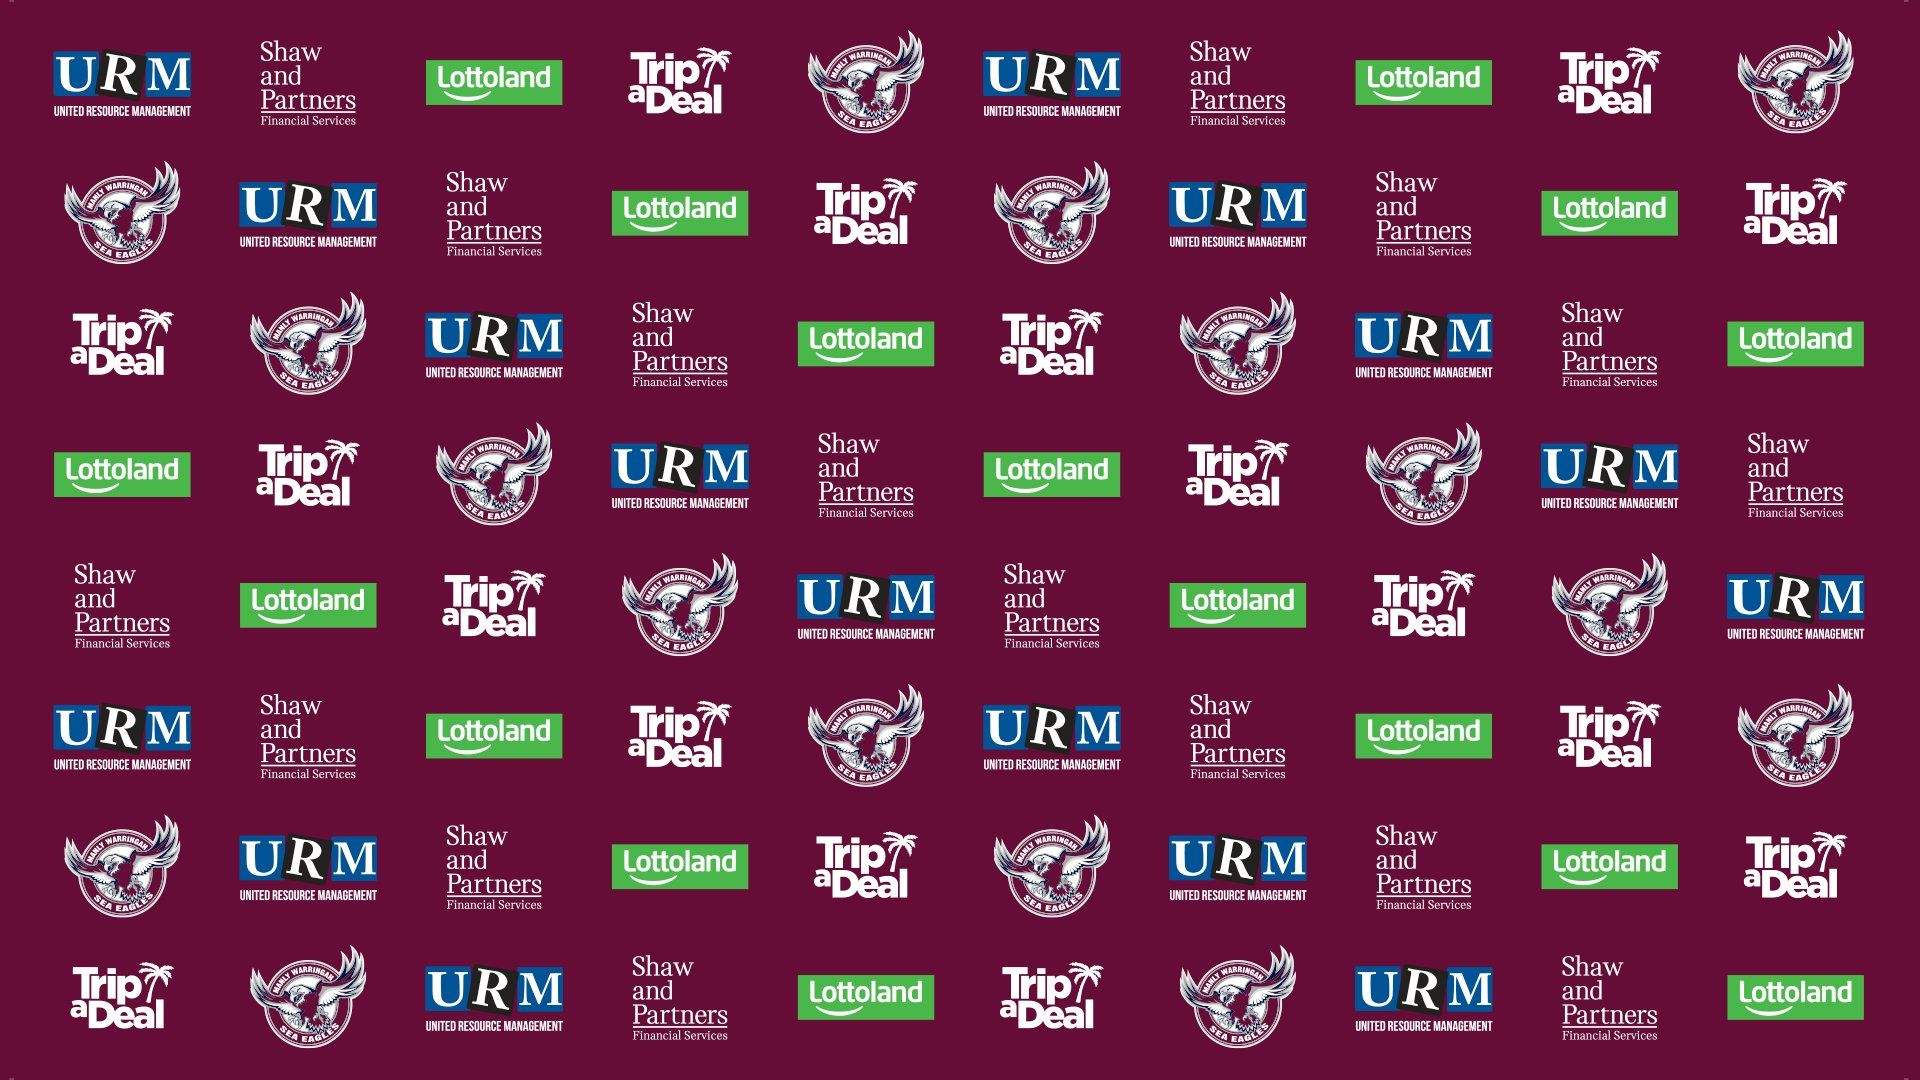 Manly Warringah Sea Eagles a meeting locked in? Represent the Sea Eagles with our background. Just save the image and add them as virtual background! #ManlyForever